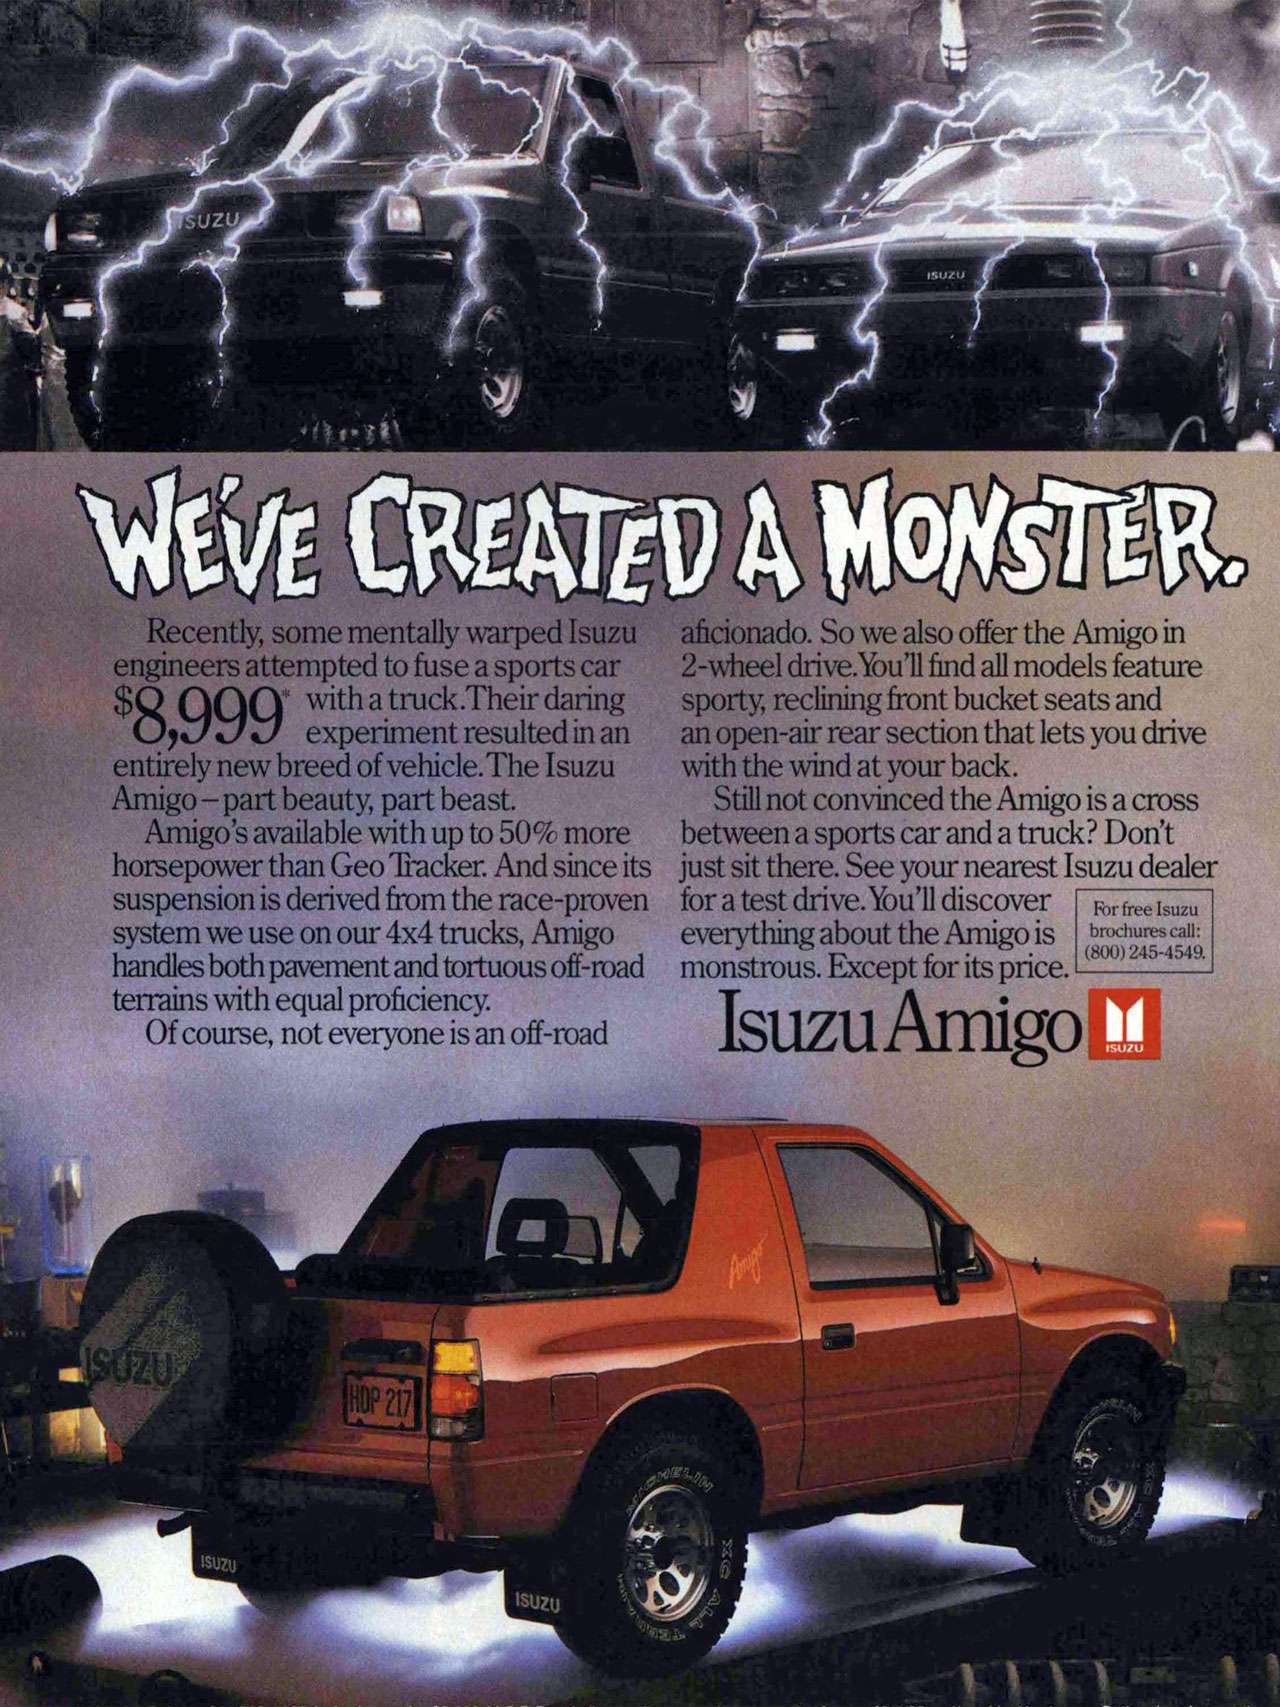 We've created a monster. The Isuzu Amigo. Recently, some mentally warped Isuzu engineers attempted to fuse a sports car $ 01001' with atruck.Their daring UW Z7 experiment resulted in an entirely new breed of vehicle.The Isuzu Amigo — part beauty, part beast. Amigo's available with up to 50% more horsepower than Geo 'Packer. And since its suspension is derived from the race-proven system we use on our 4x4 trucks, Amigo handles both pavement and tortuous off-mad terrains with equal proficiency. Of course, not everyone is an off-road aficionado. So we also offer the Amigo in 2-wheel chive.You'll find all models feature sporty, reclining front bucket seats and an open-air rear section that lets you drive with the wind at your back. Still not convinced the Amigo is a cross between a sports car and a truck? Don't just sit there. See your nearest Isuzu dealer for a test drive. You'll discover everything about the Amigo is monstrous. Except for its price. For free Isuzu brochures call: (8(X)) 245-4549. Isuzu Amigo